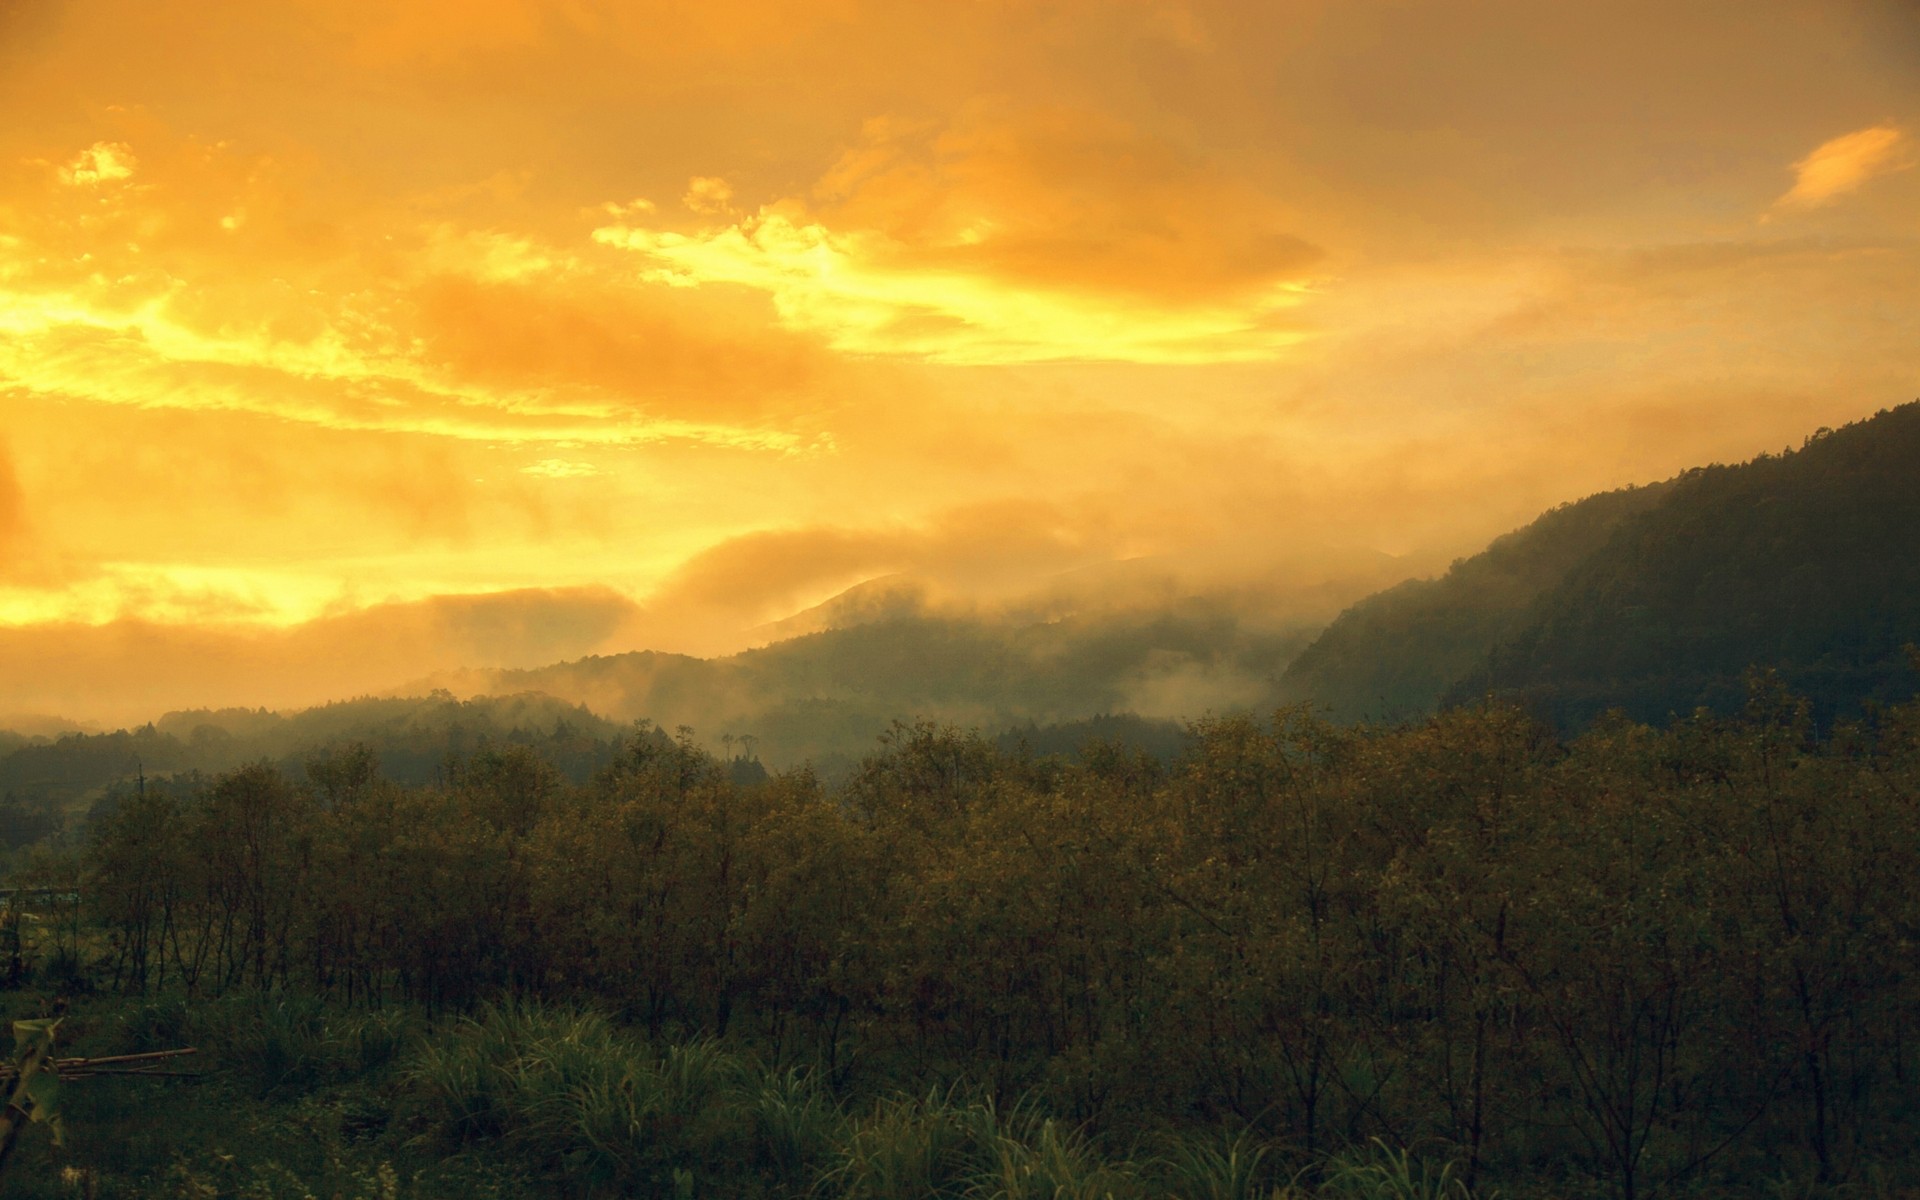 General 1920x1200 nature landscape sunset mountains clouds trees sky yellow mist orange sky